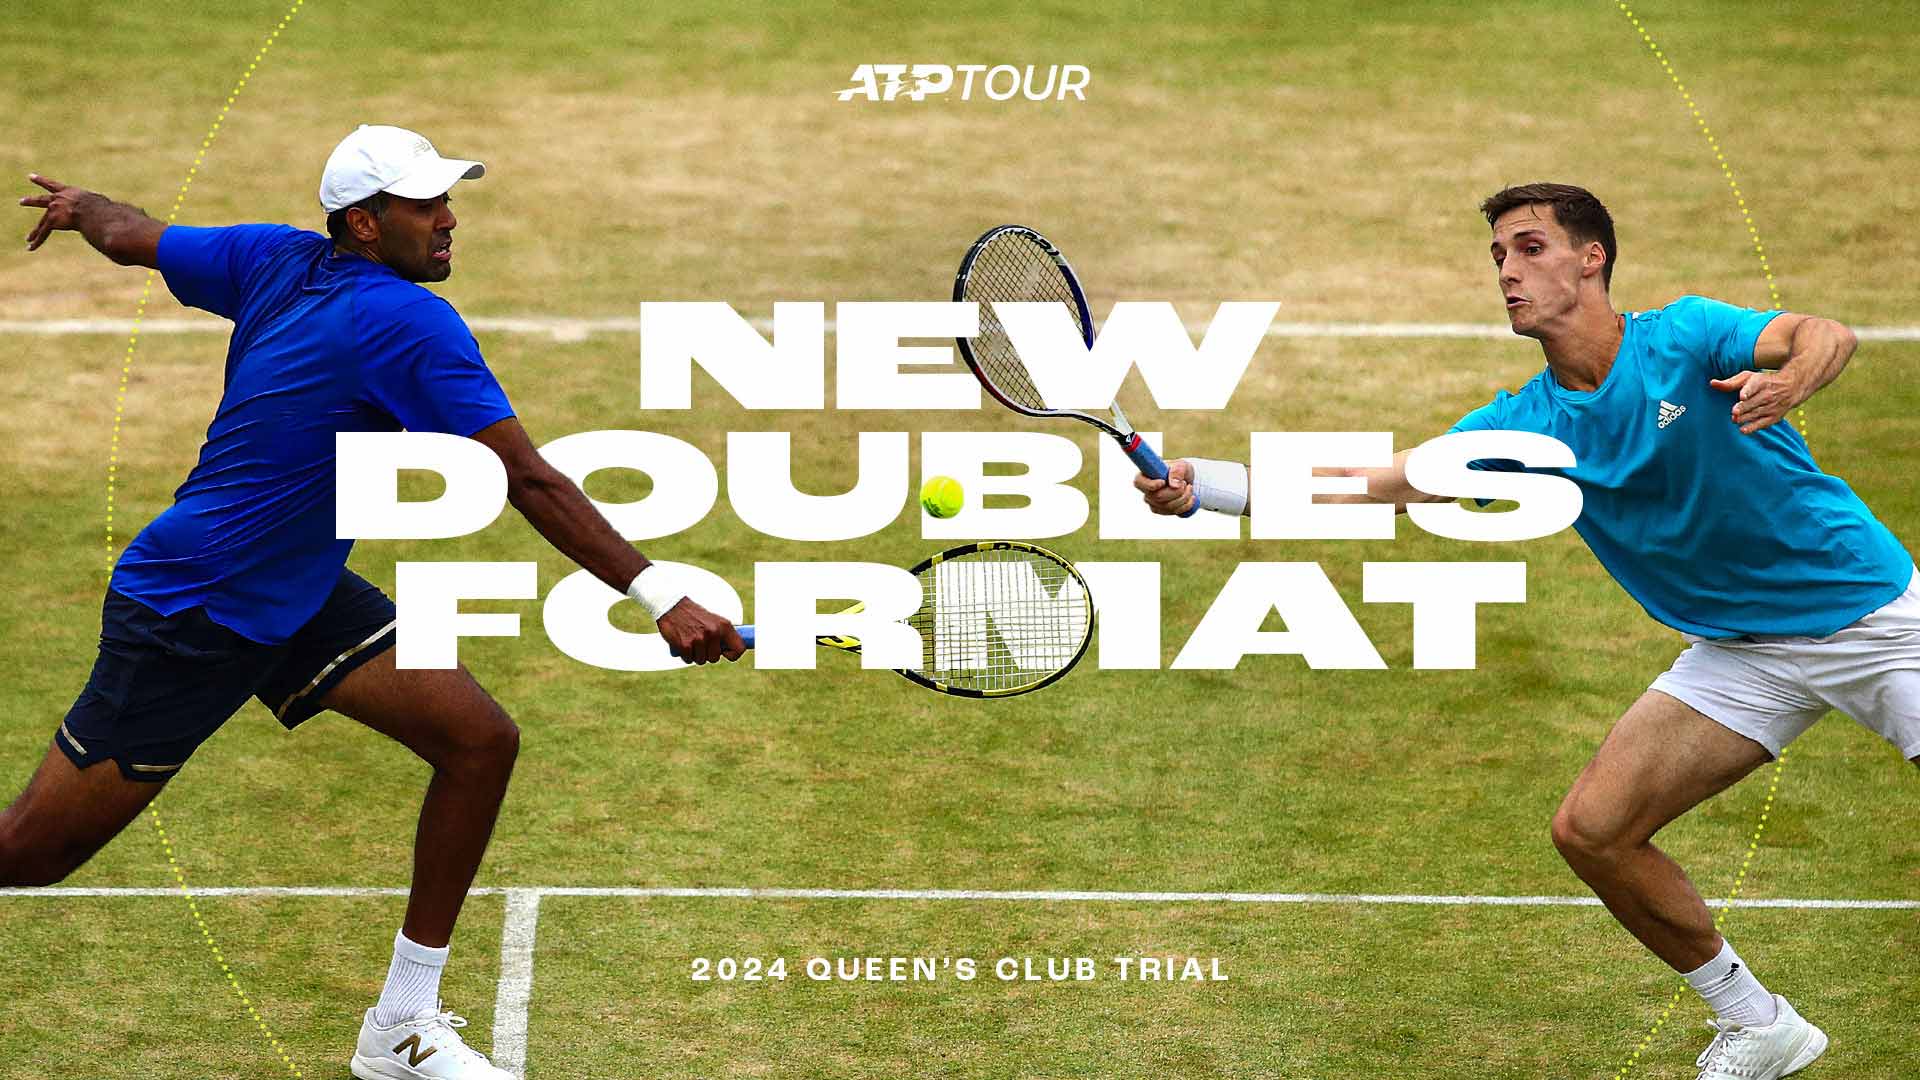 The Cinch Championships is the second tournament to participate in the 2024 ATP Doubles Trial.